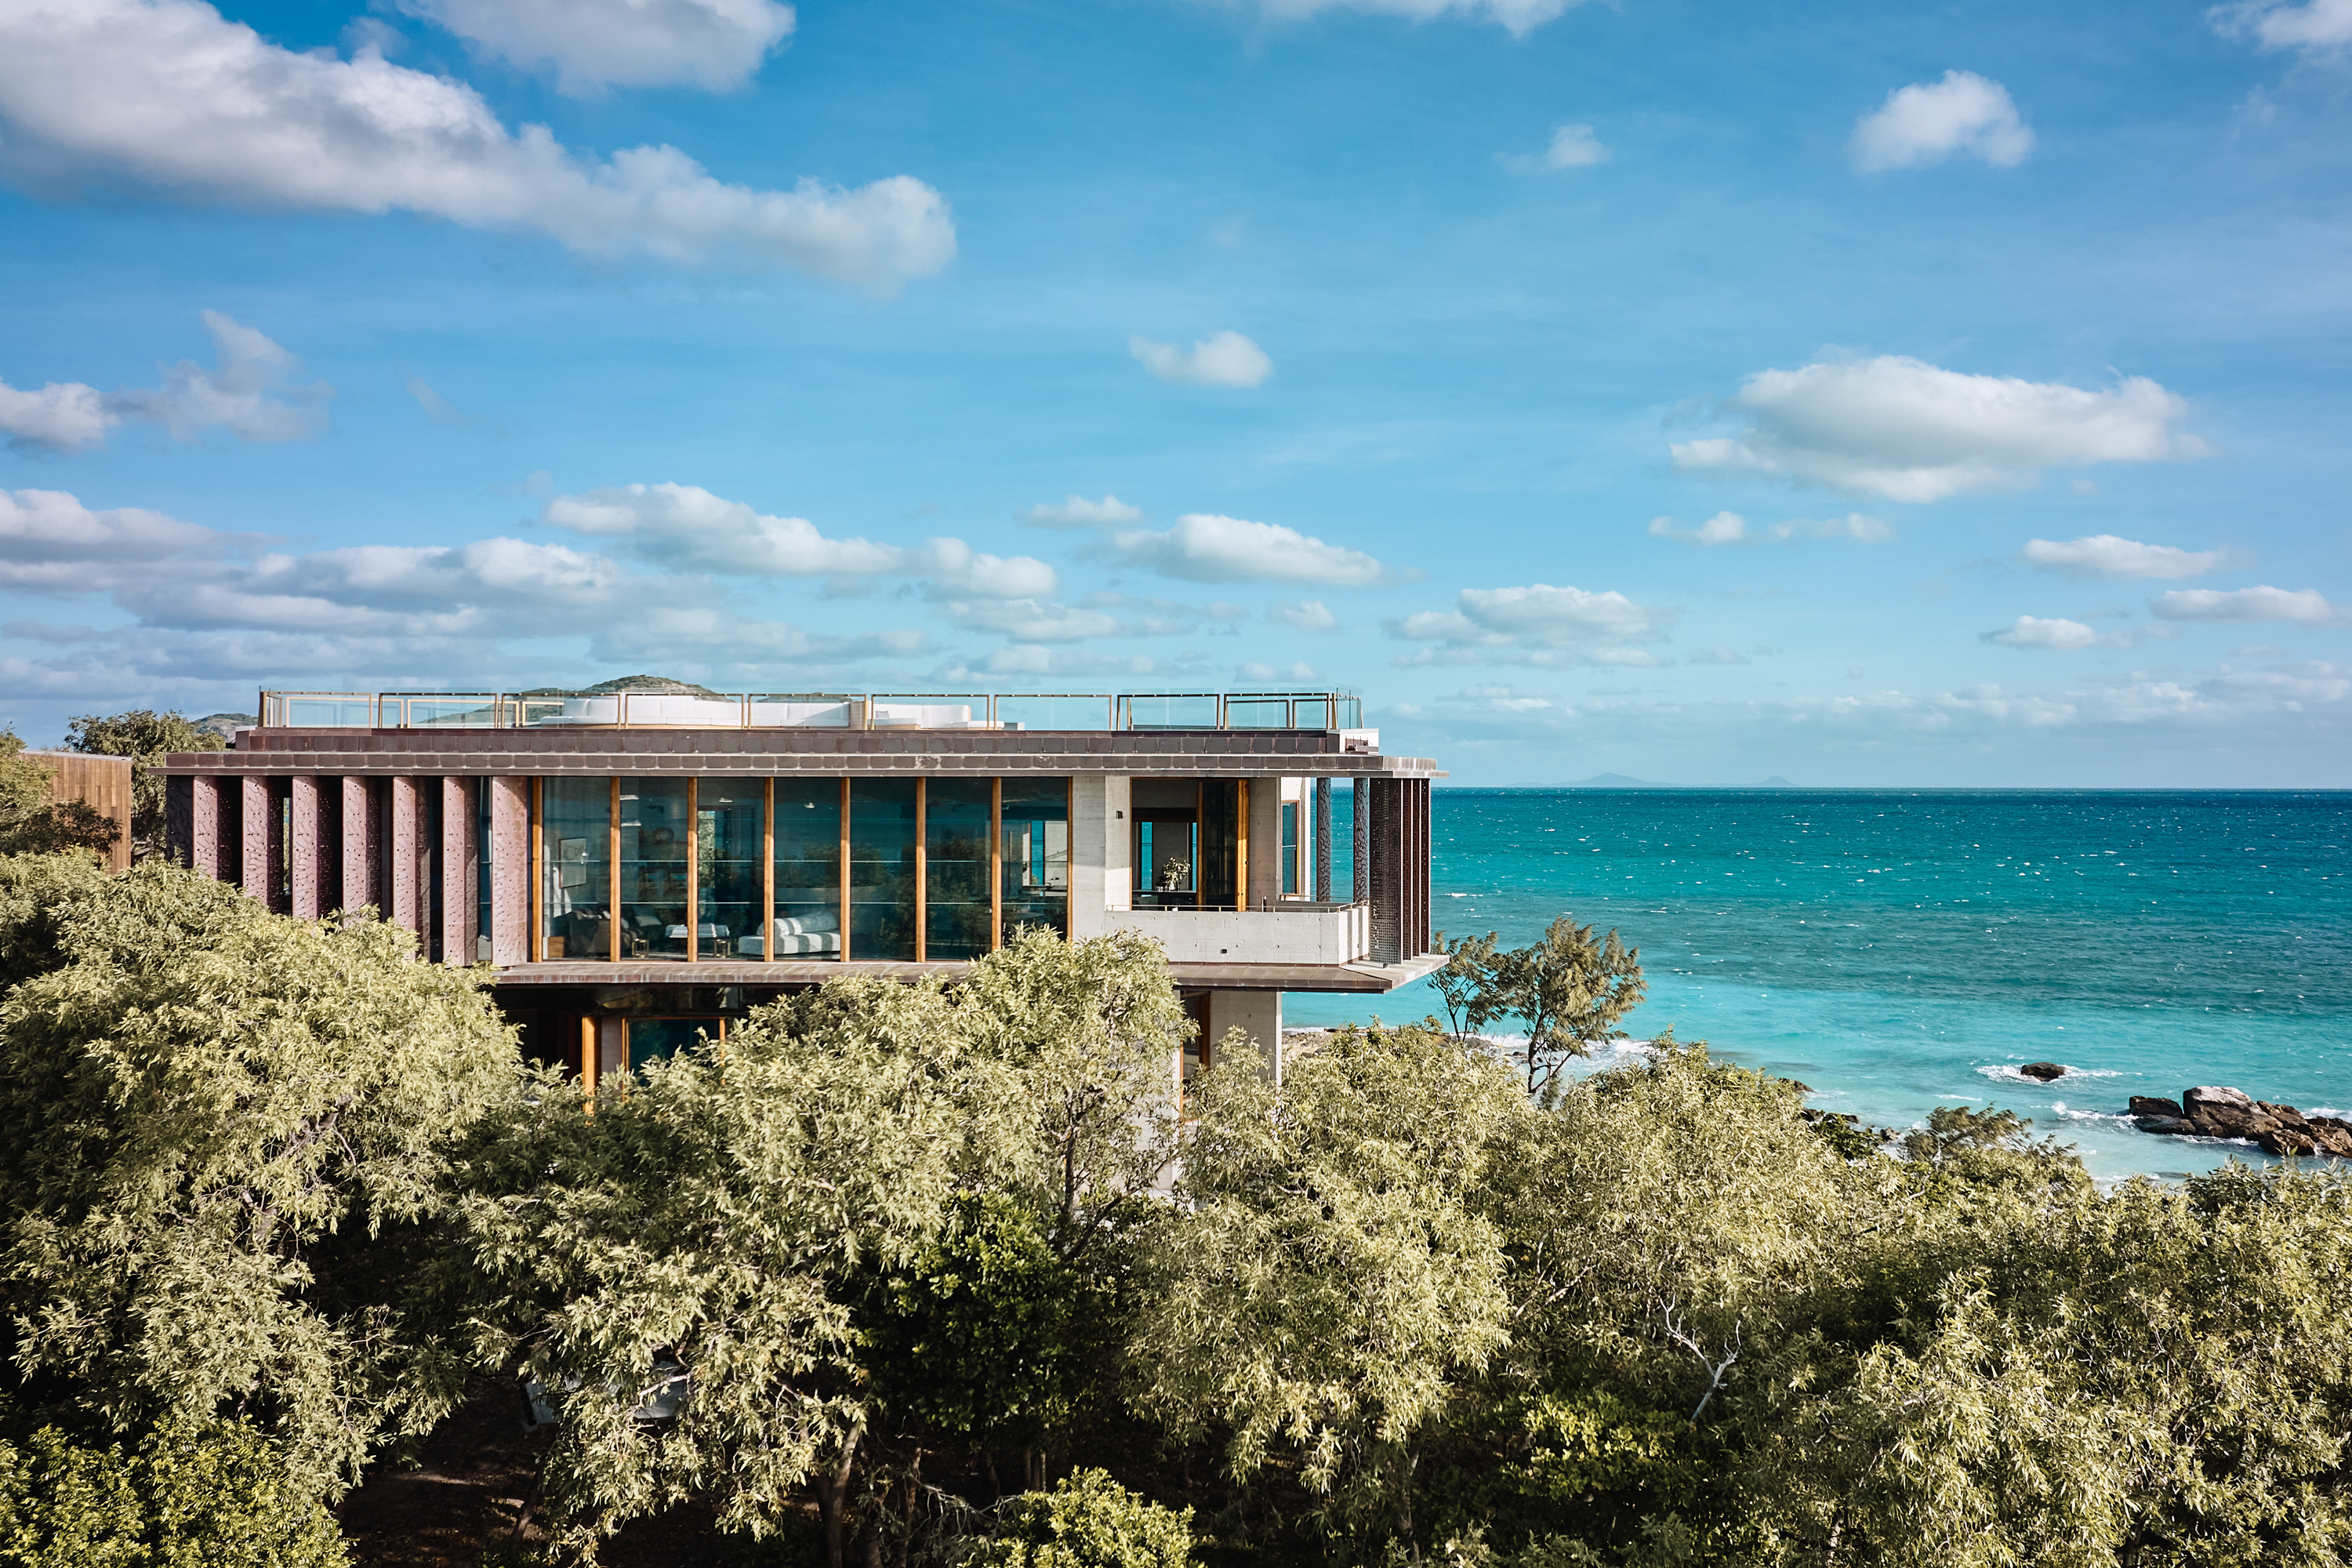 An Astonishing Brutalist House in the Great Barrier Reef